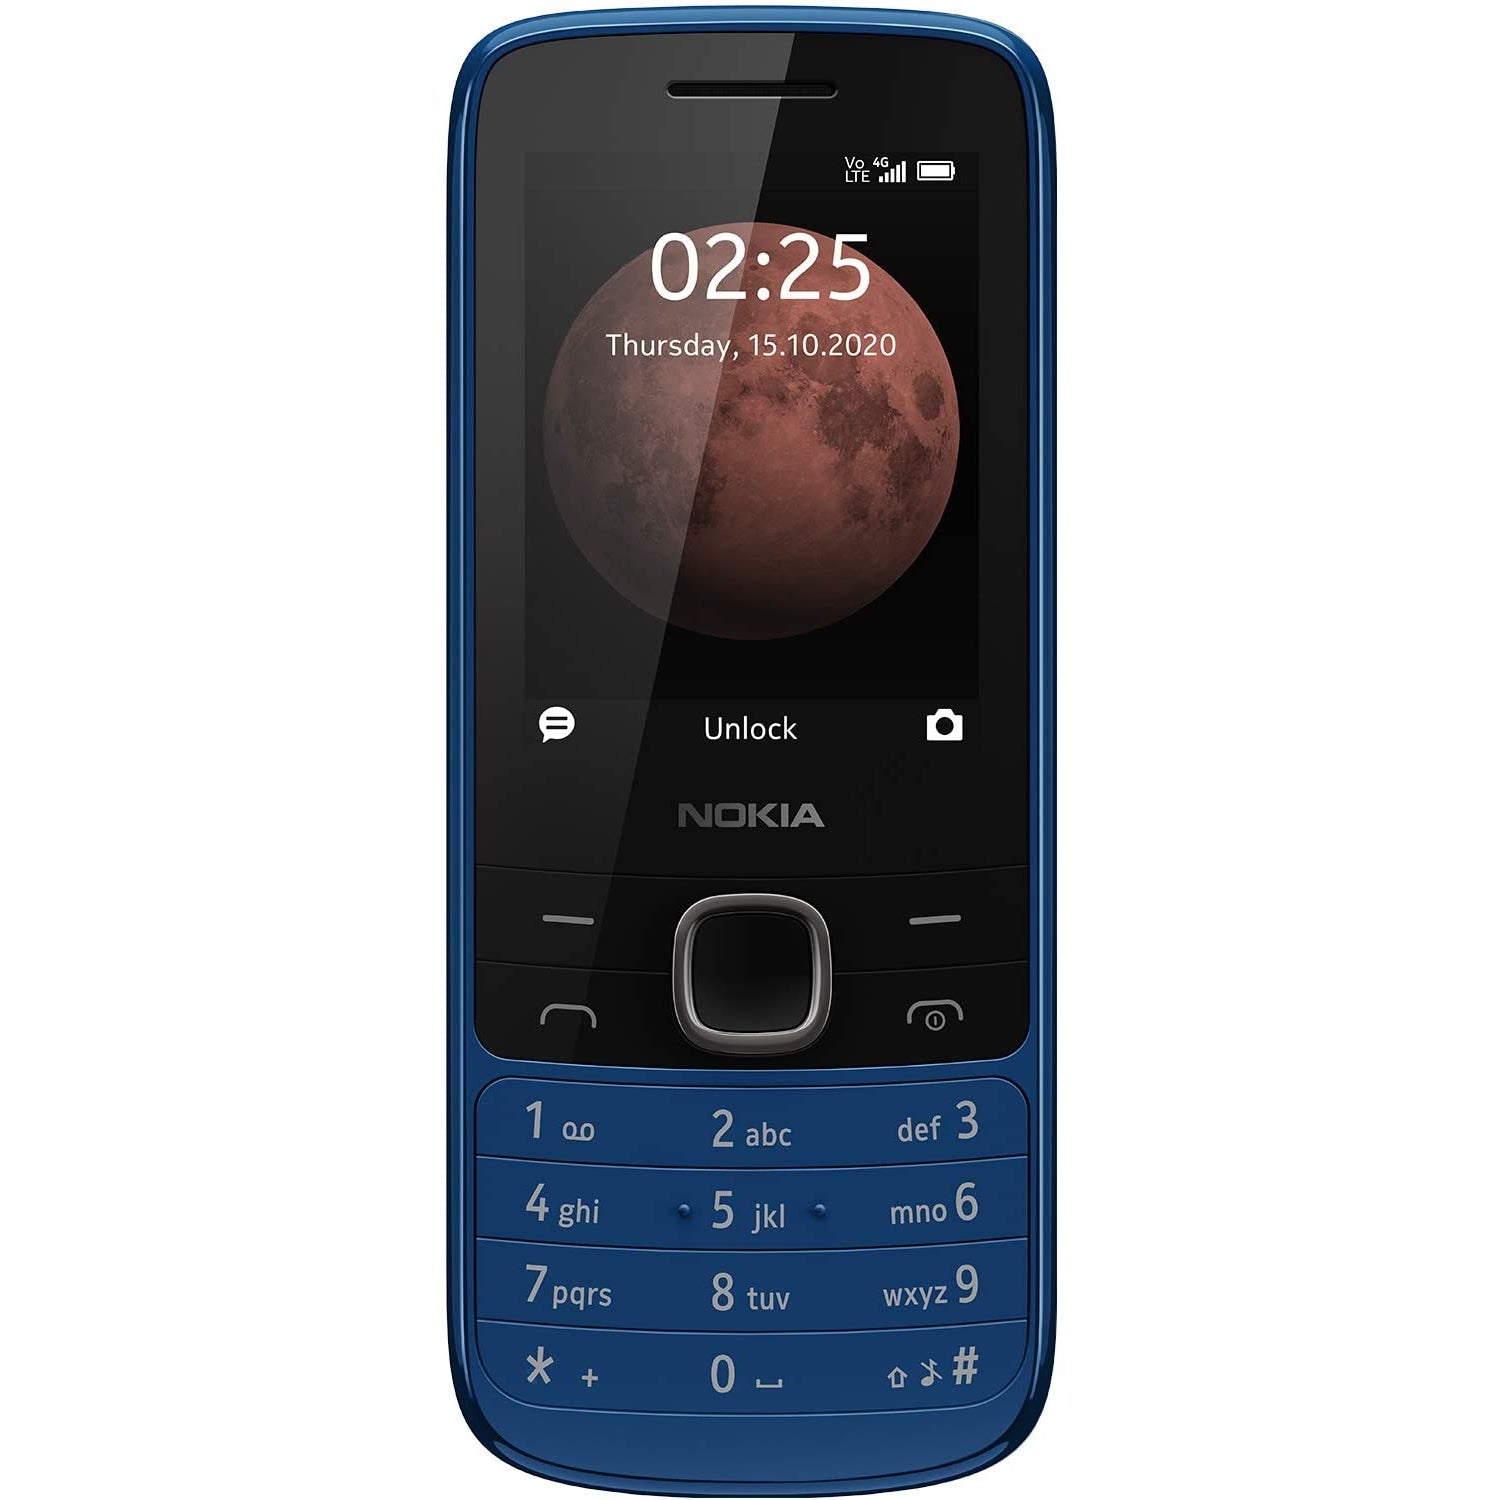 Nokia 225 4G 2.4-Inch UK SIM-Free Feature Phone - Blue - Refurbished Excellent